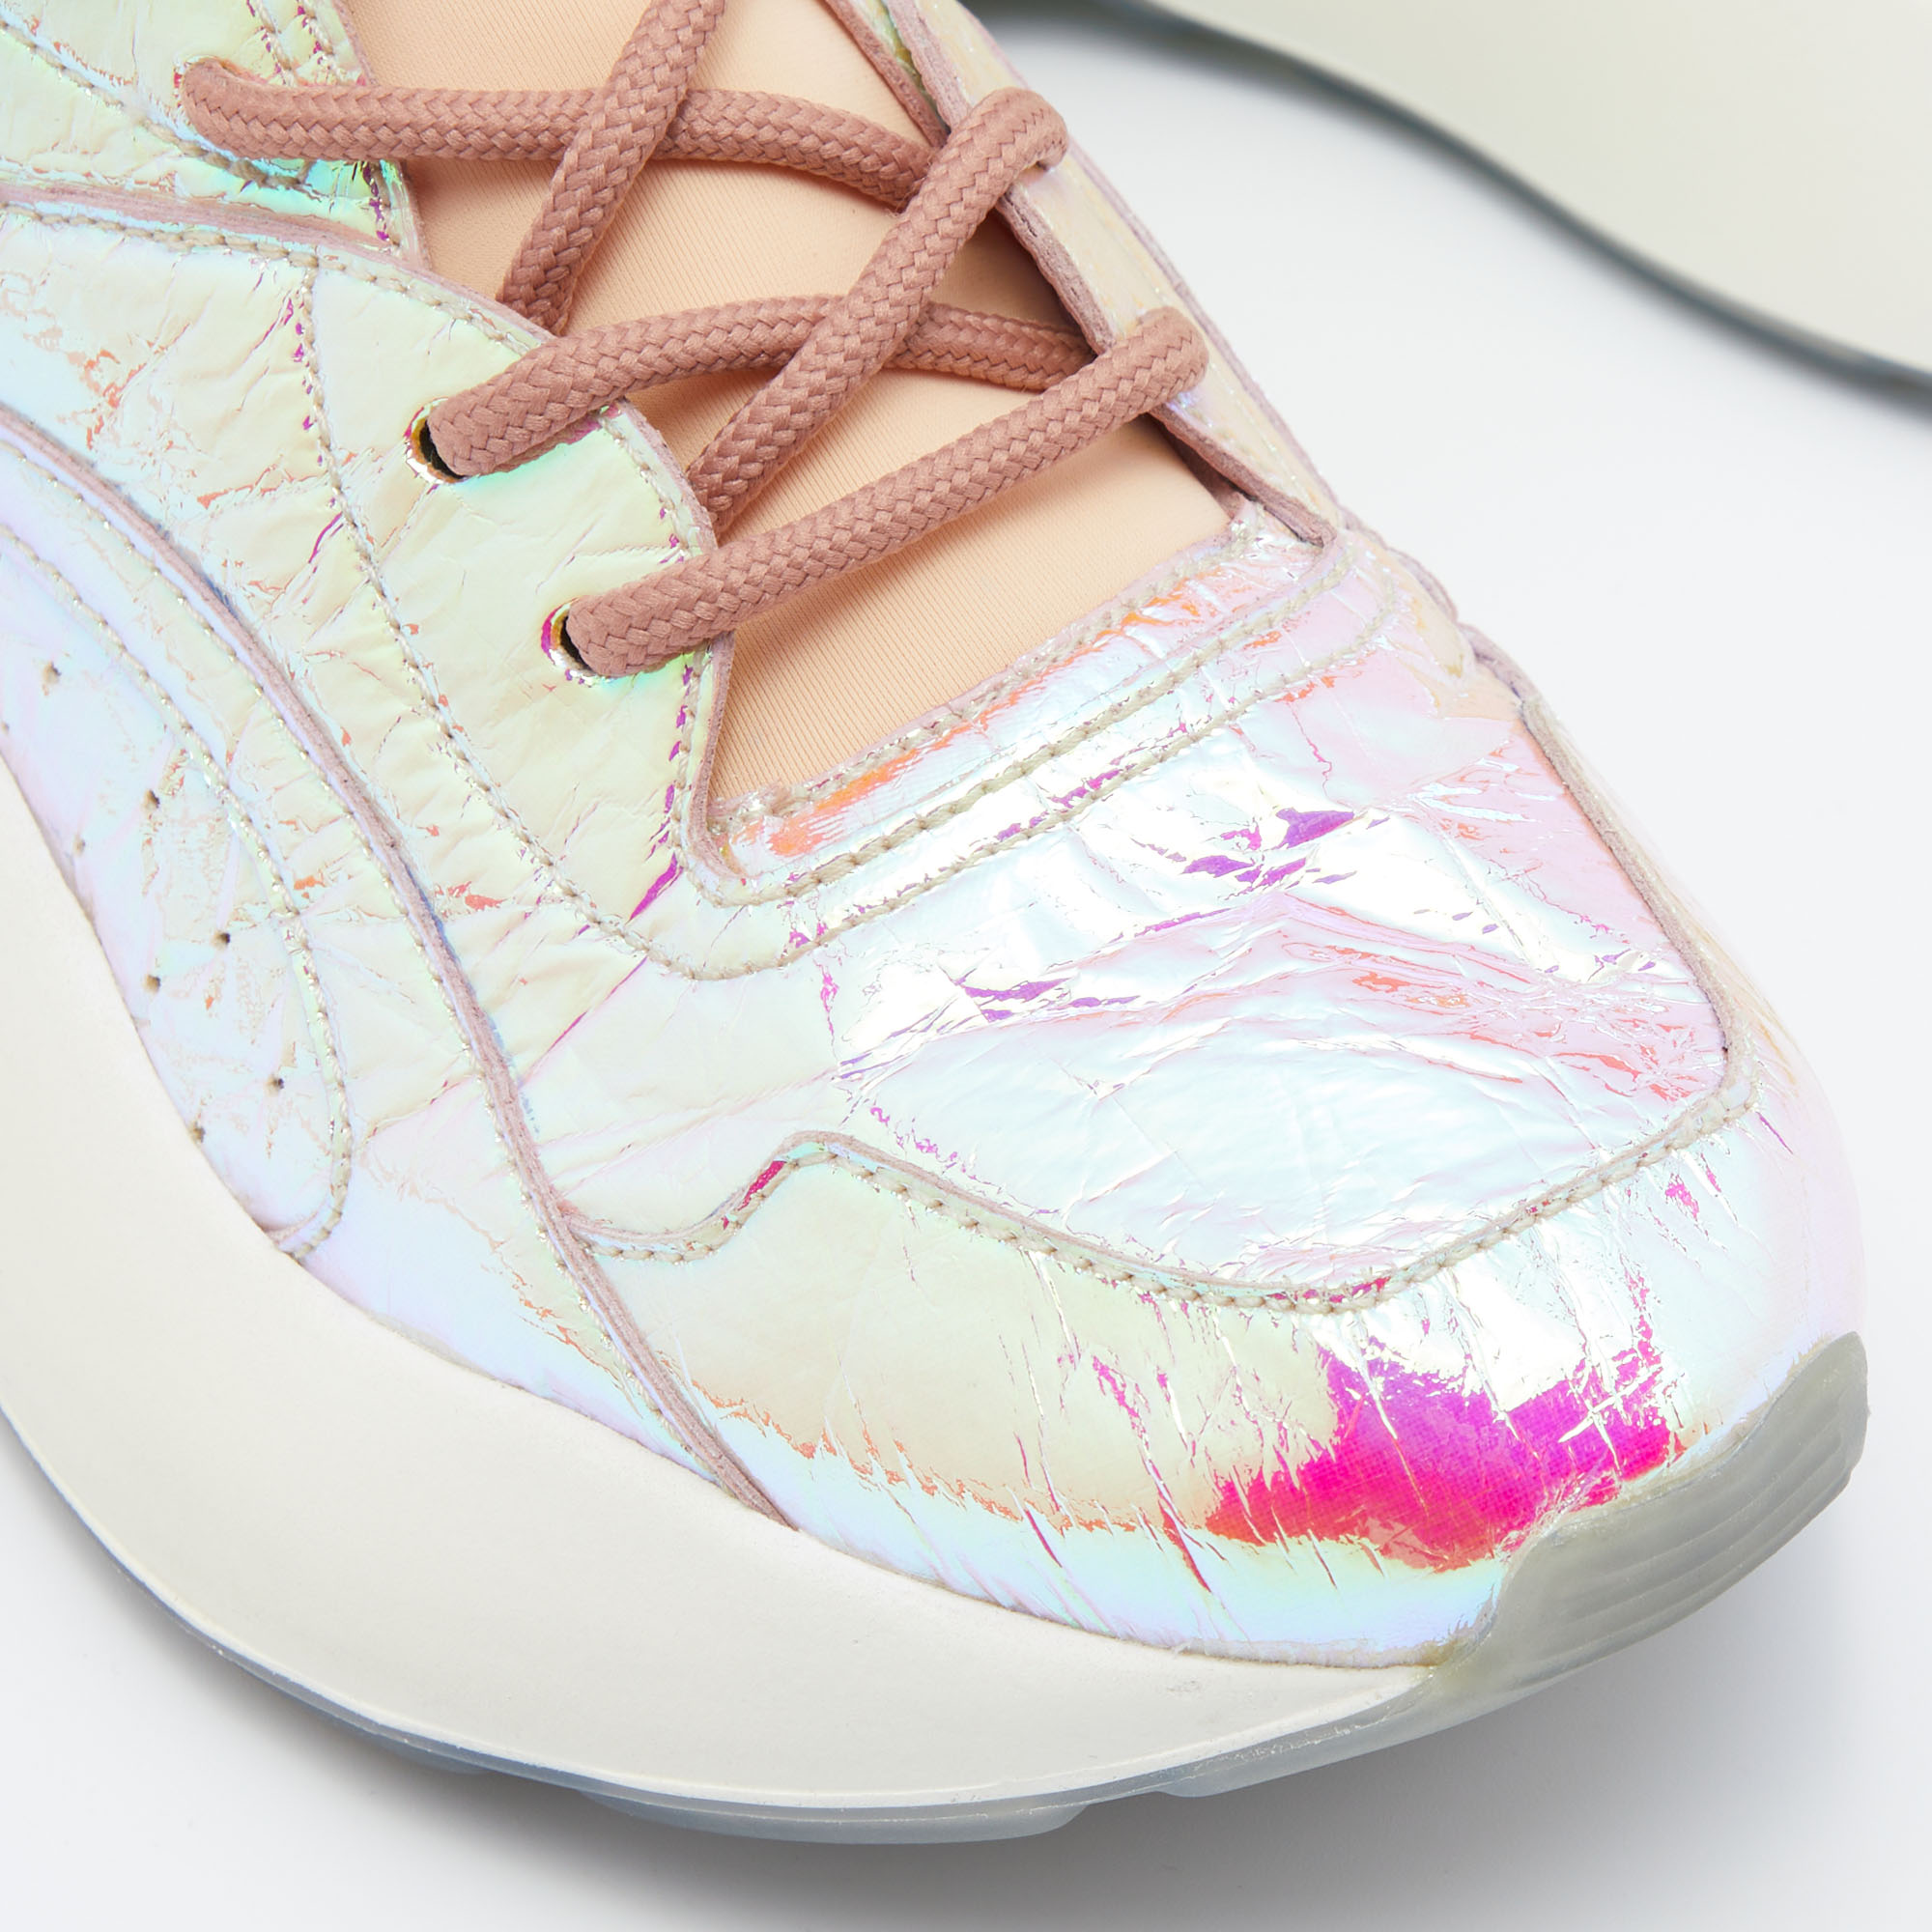 Stella McCartney Multicolor Holographic Faux Leather And Neoprene Sneakers Size 38